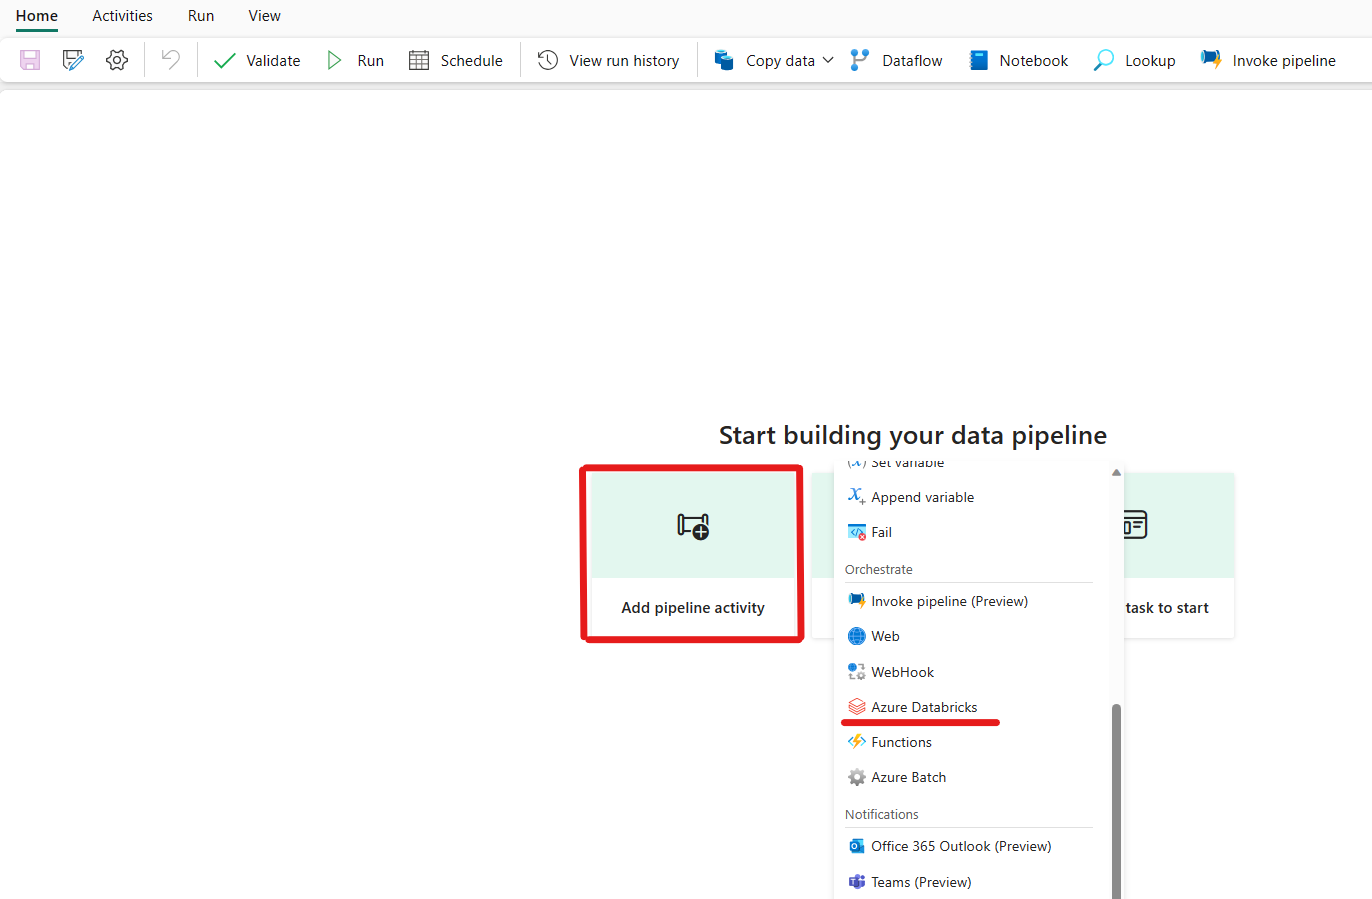 Screenshot of the Fabric Data pipelines landing page and Azure Databricks activity highlighted.